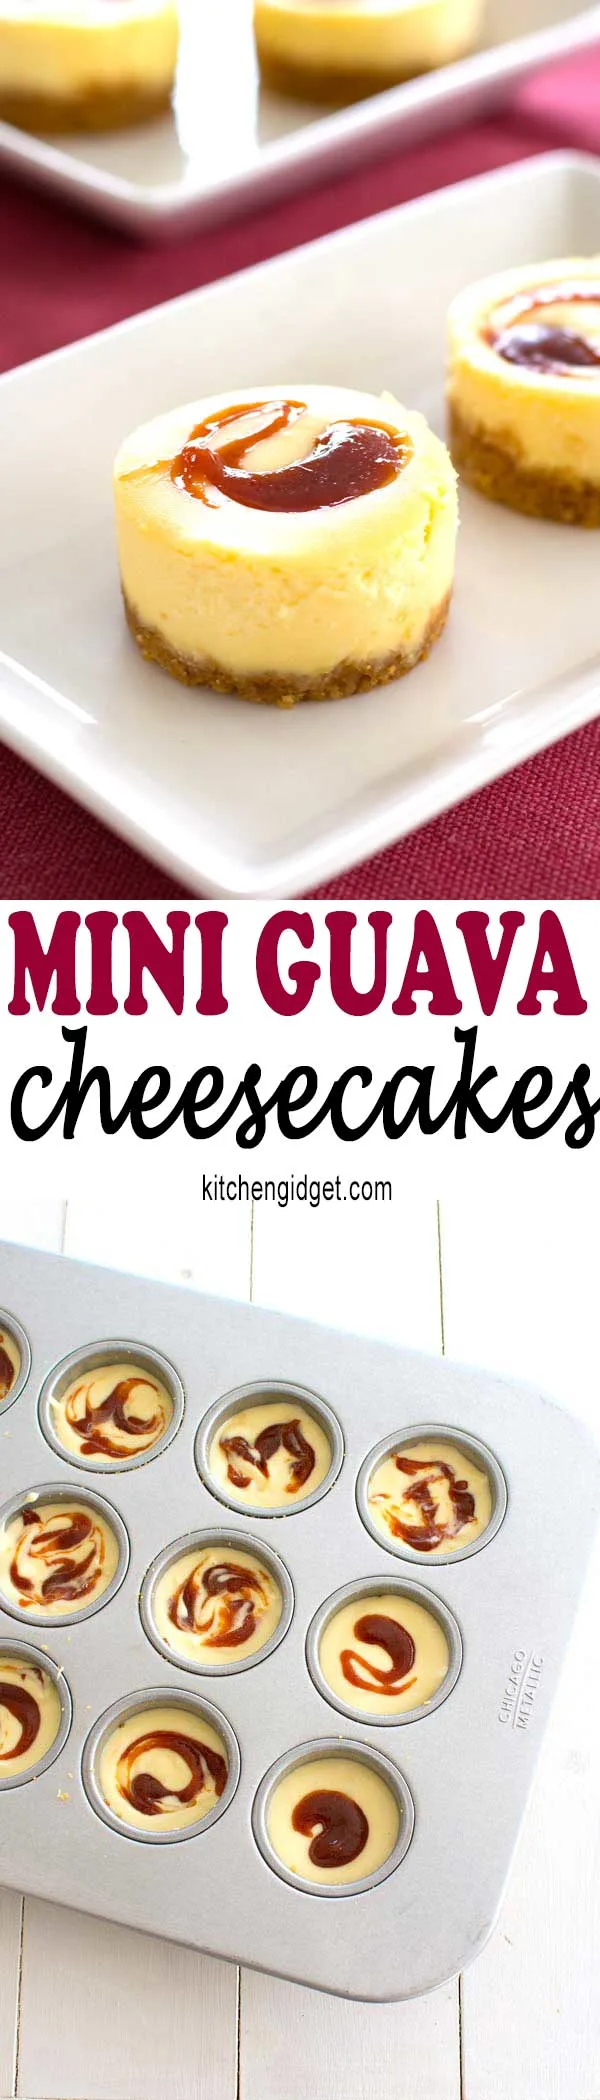 These tropical mini guava cheesecakes taste as good as they look! Perfect dessert recipe for a Puerto Rican or Cuban dinner!